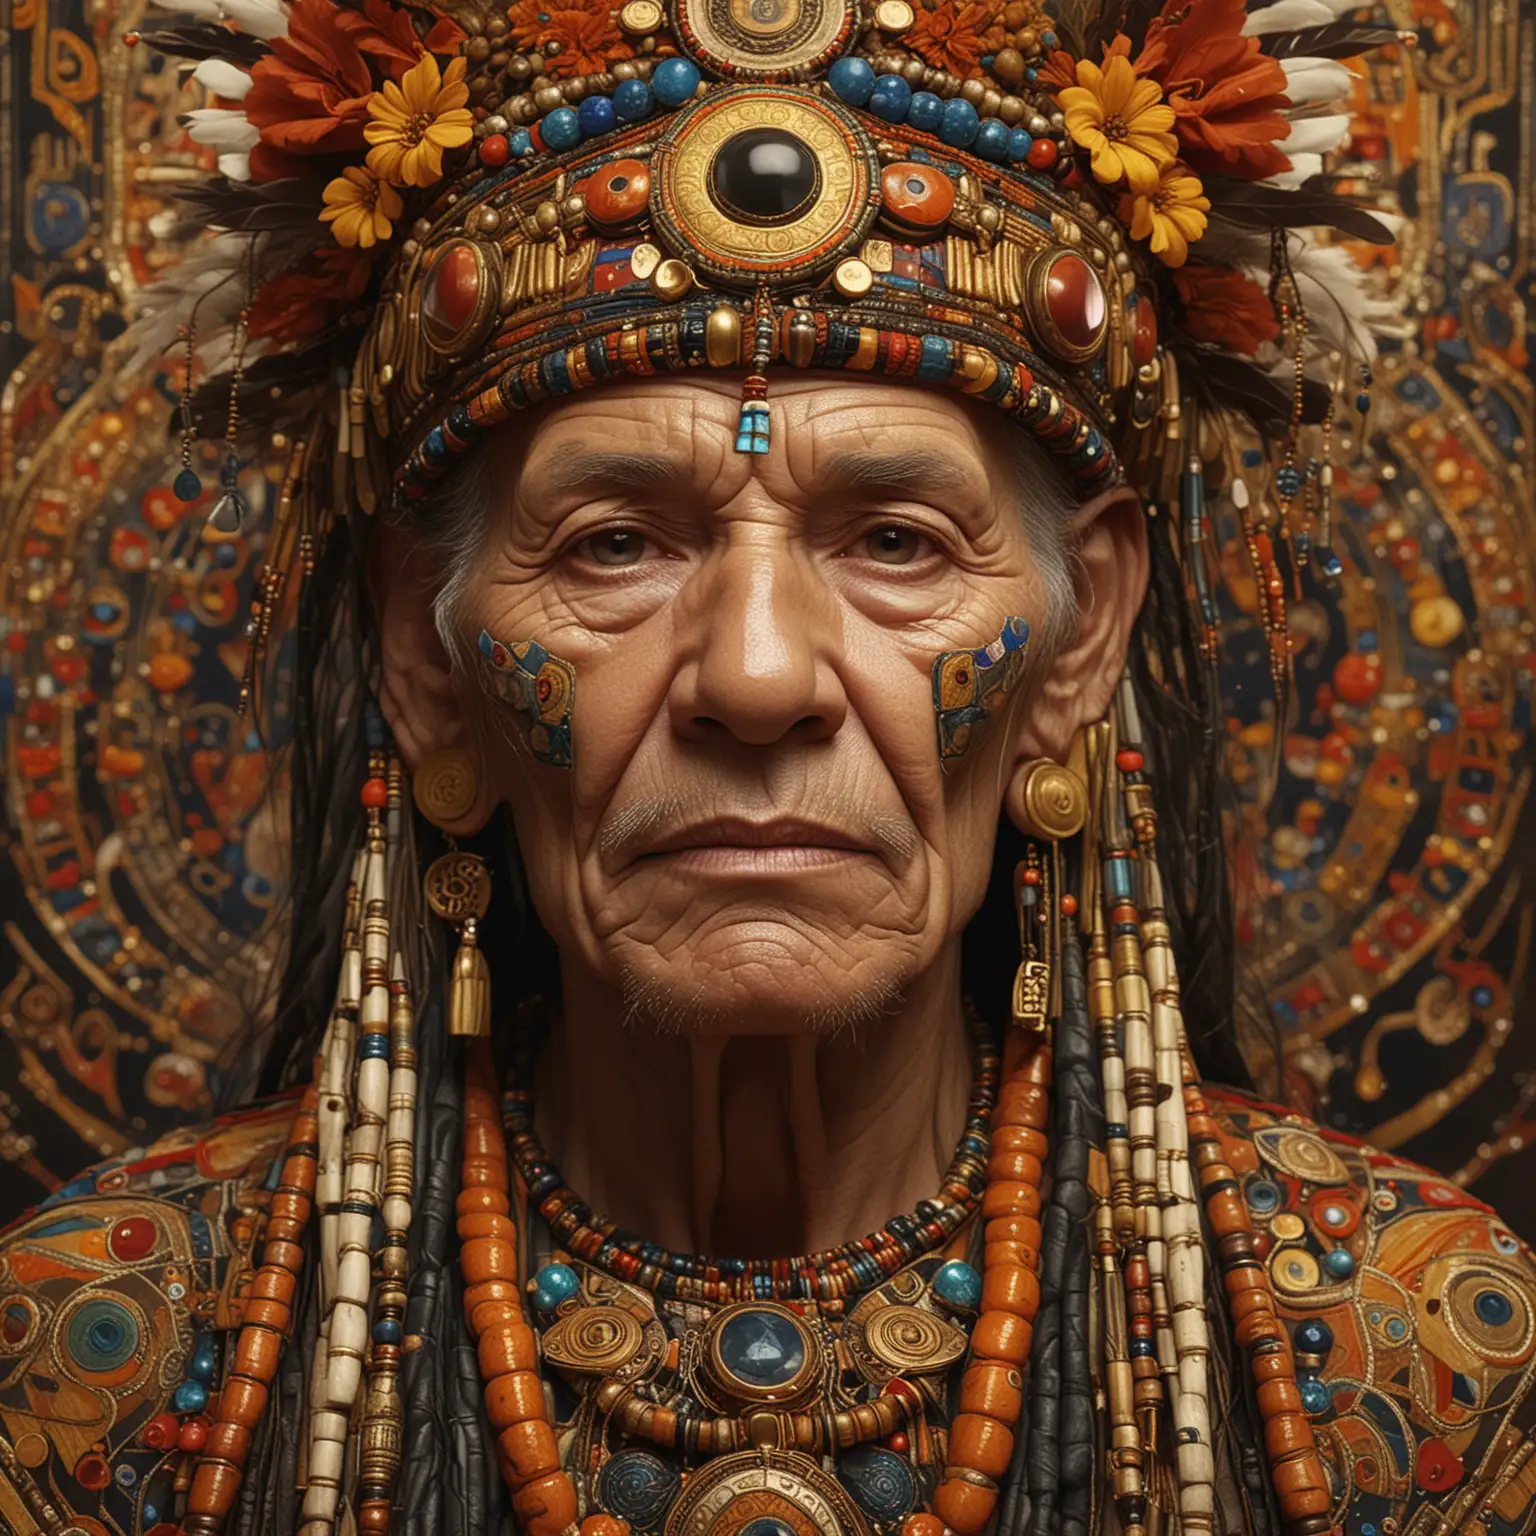 Realistic Elder Shaman Portrait with Intricate Tribal Art and Warm Hues